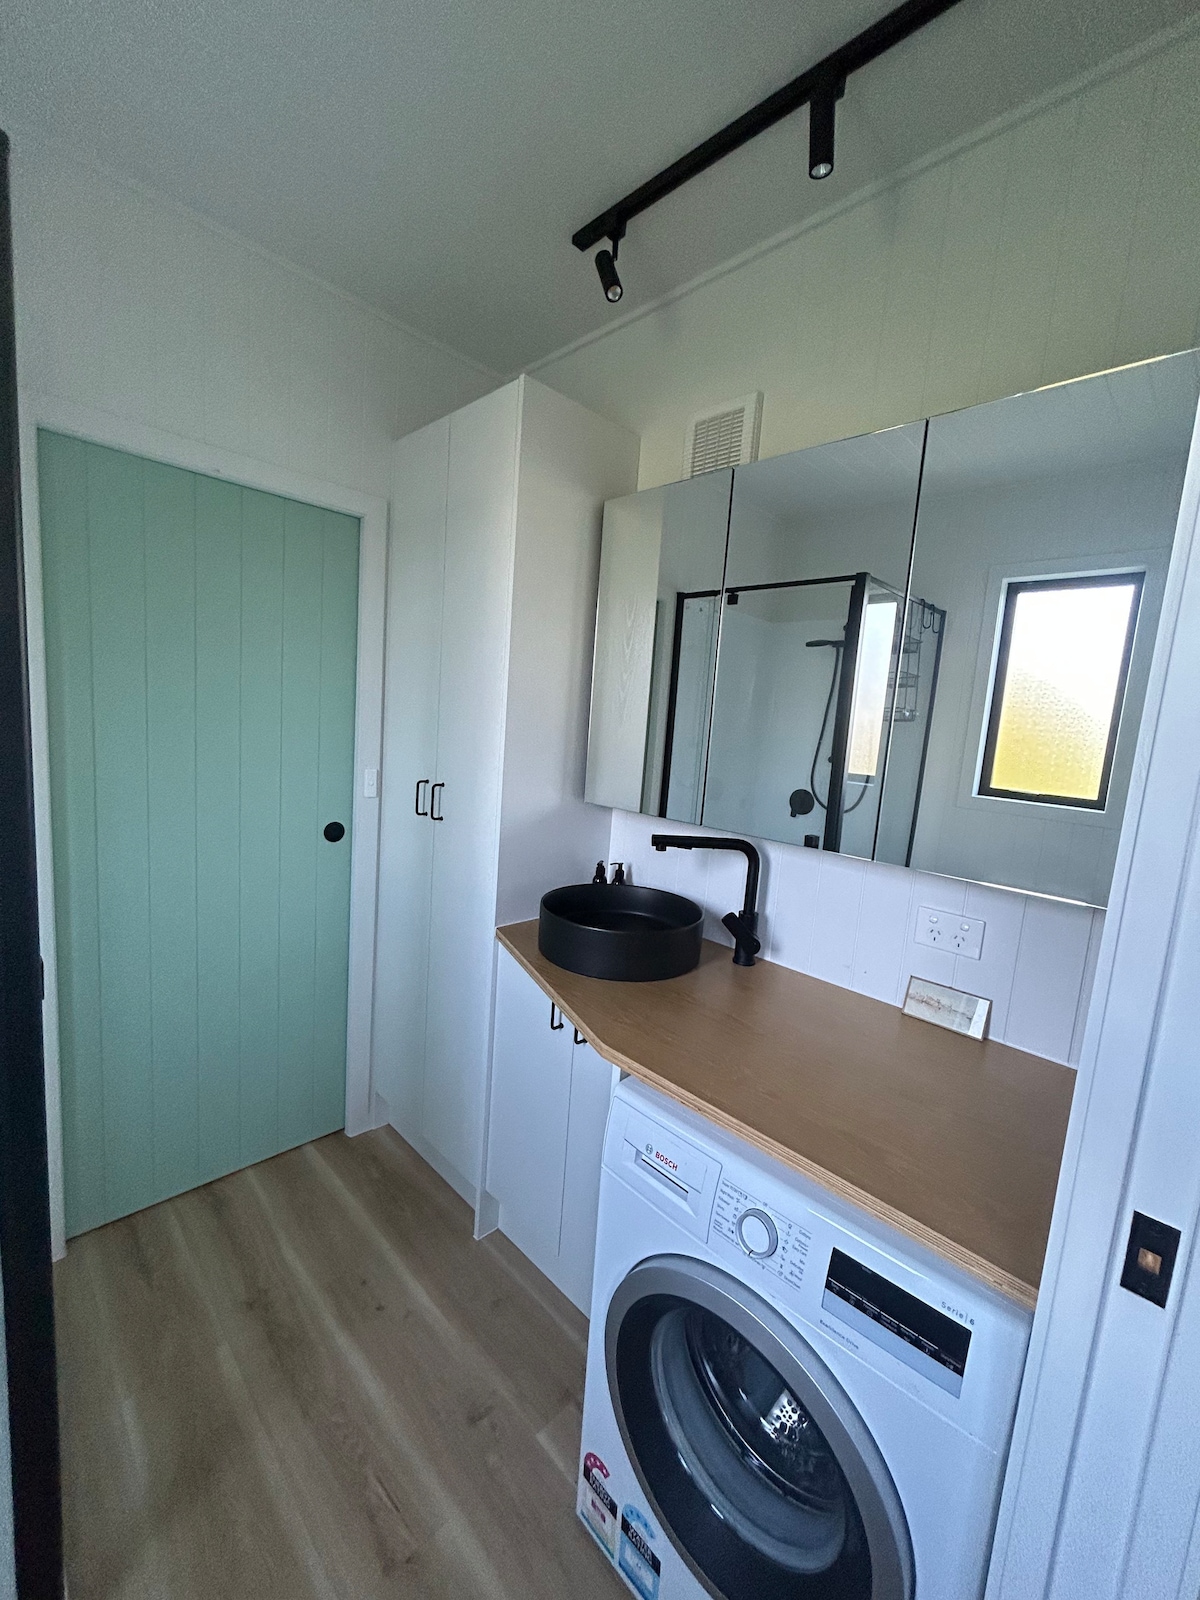 Tui Tiny House farmstay - kids and dogs welcome